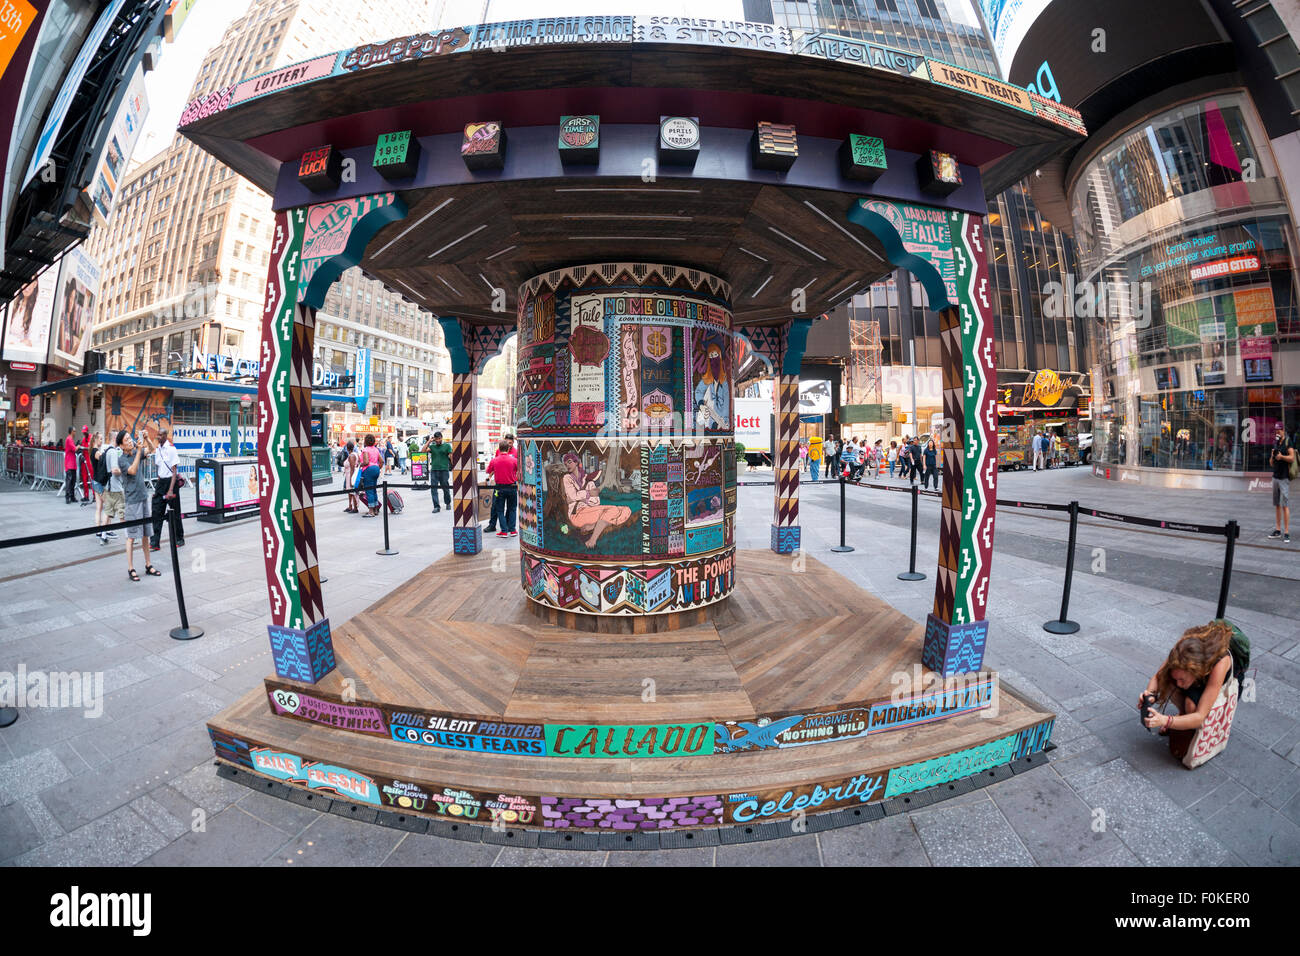 'FAILE: Wishing on You' debuts in Times Square in New York on Monday, August 17, 2015. The installation which reimagines Asian prayer wheels using designs inspired by Times Square history is by the artist collaboration FAILE, Patrick McNeil and Patrick Miller. The public sculpture will be on display until September 1 and runs concurrent with FAILE's exhibition at the Brooklyn Museum. (© Richard B. Levine) Stock Photo